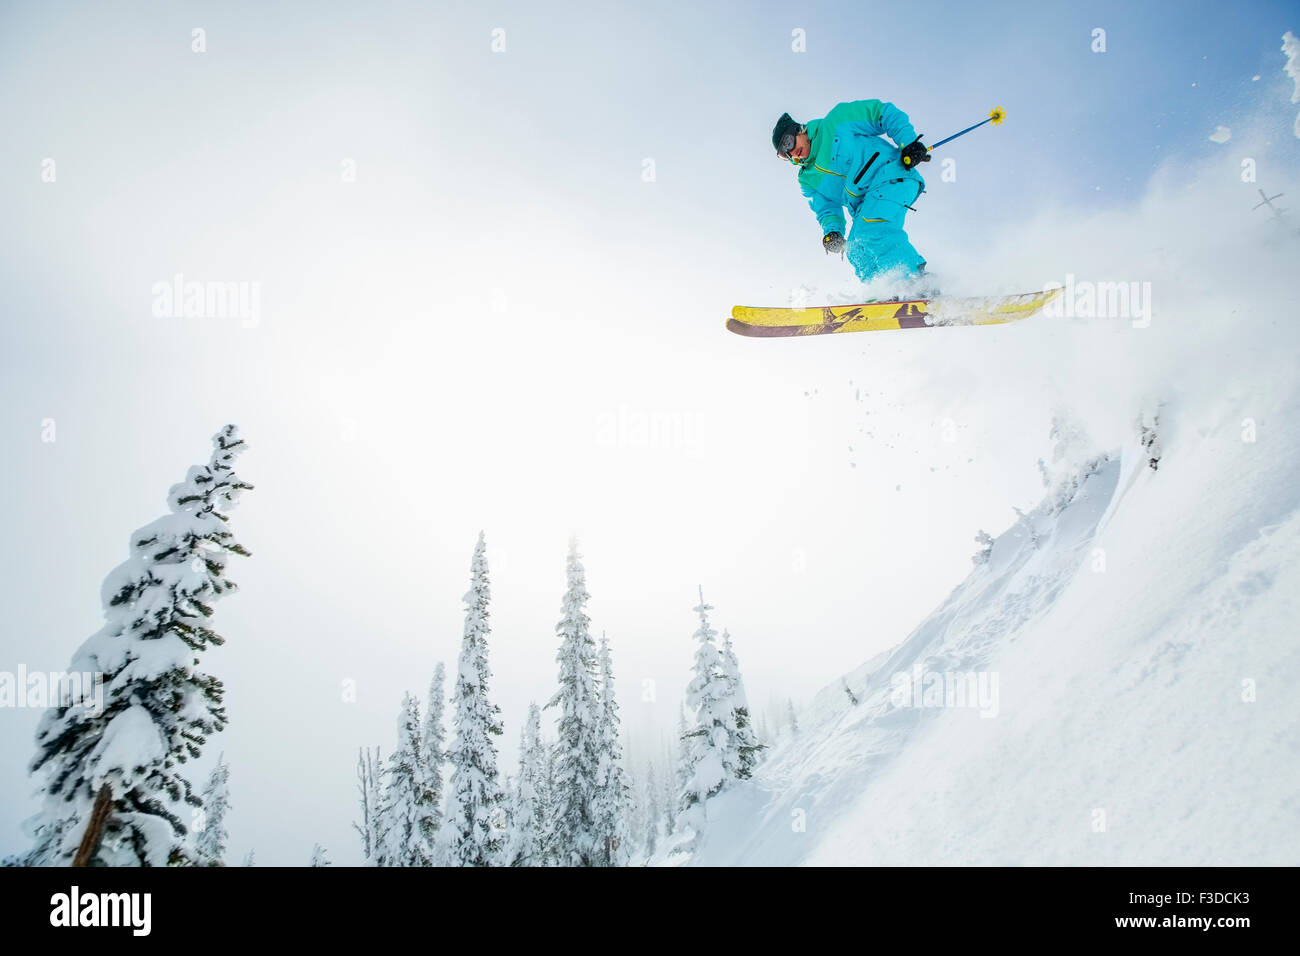 Young man jumping from ski slope Stock Photo